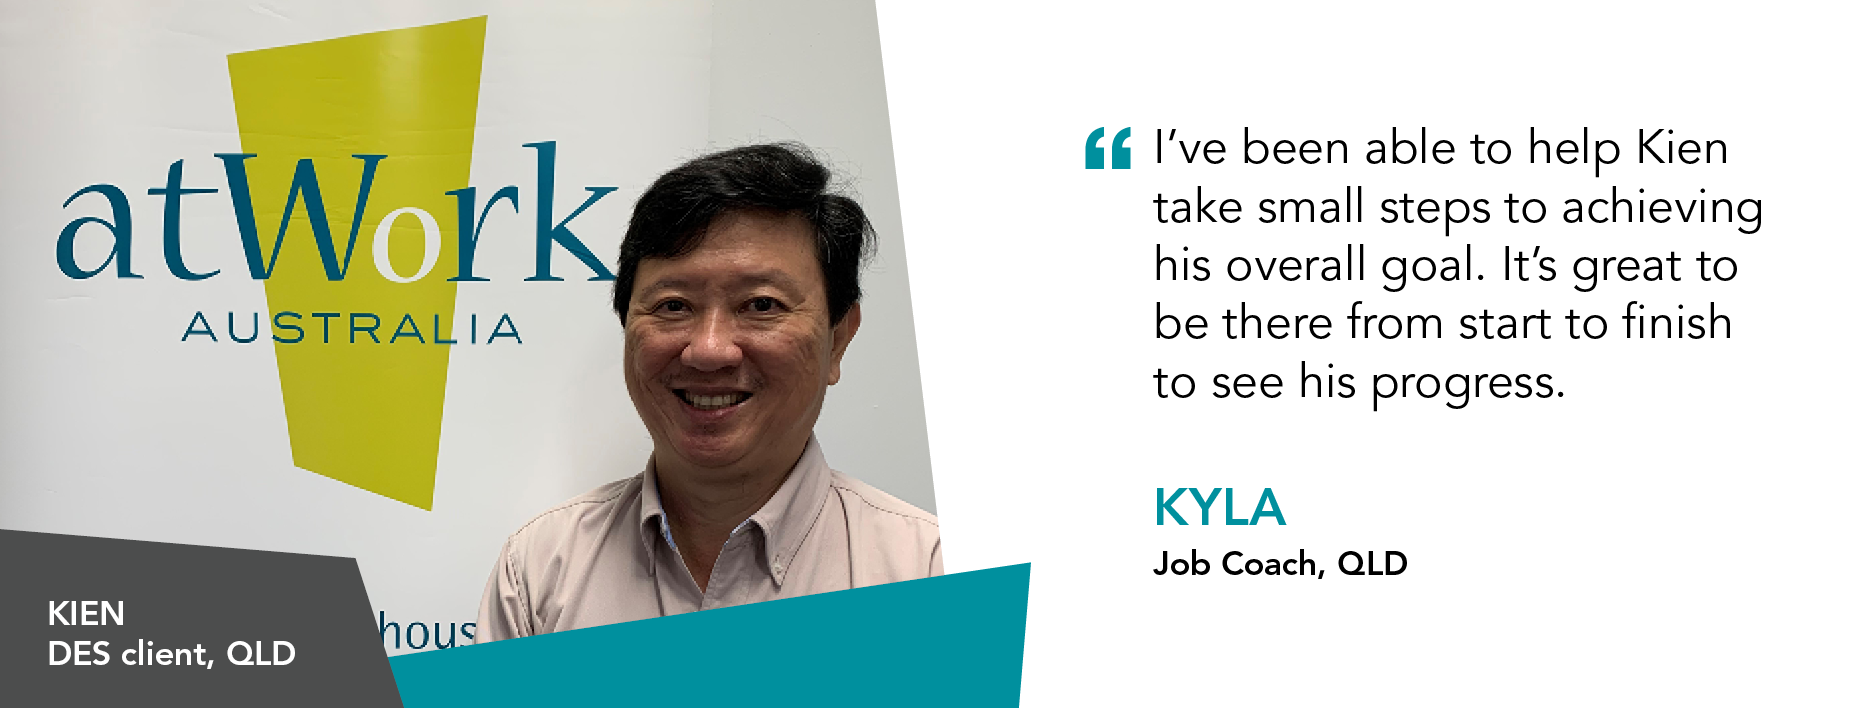 I've been able to help Kien take small steps to achieving his overall goal. It's great to be there from start to finish to see his progress." Kyla, Job Coach, Queensland